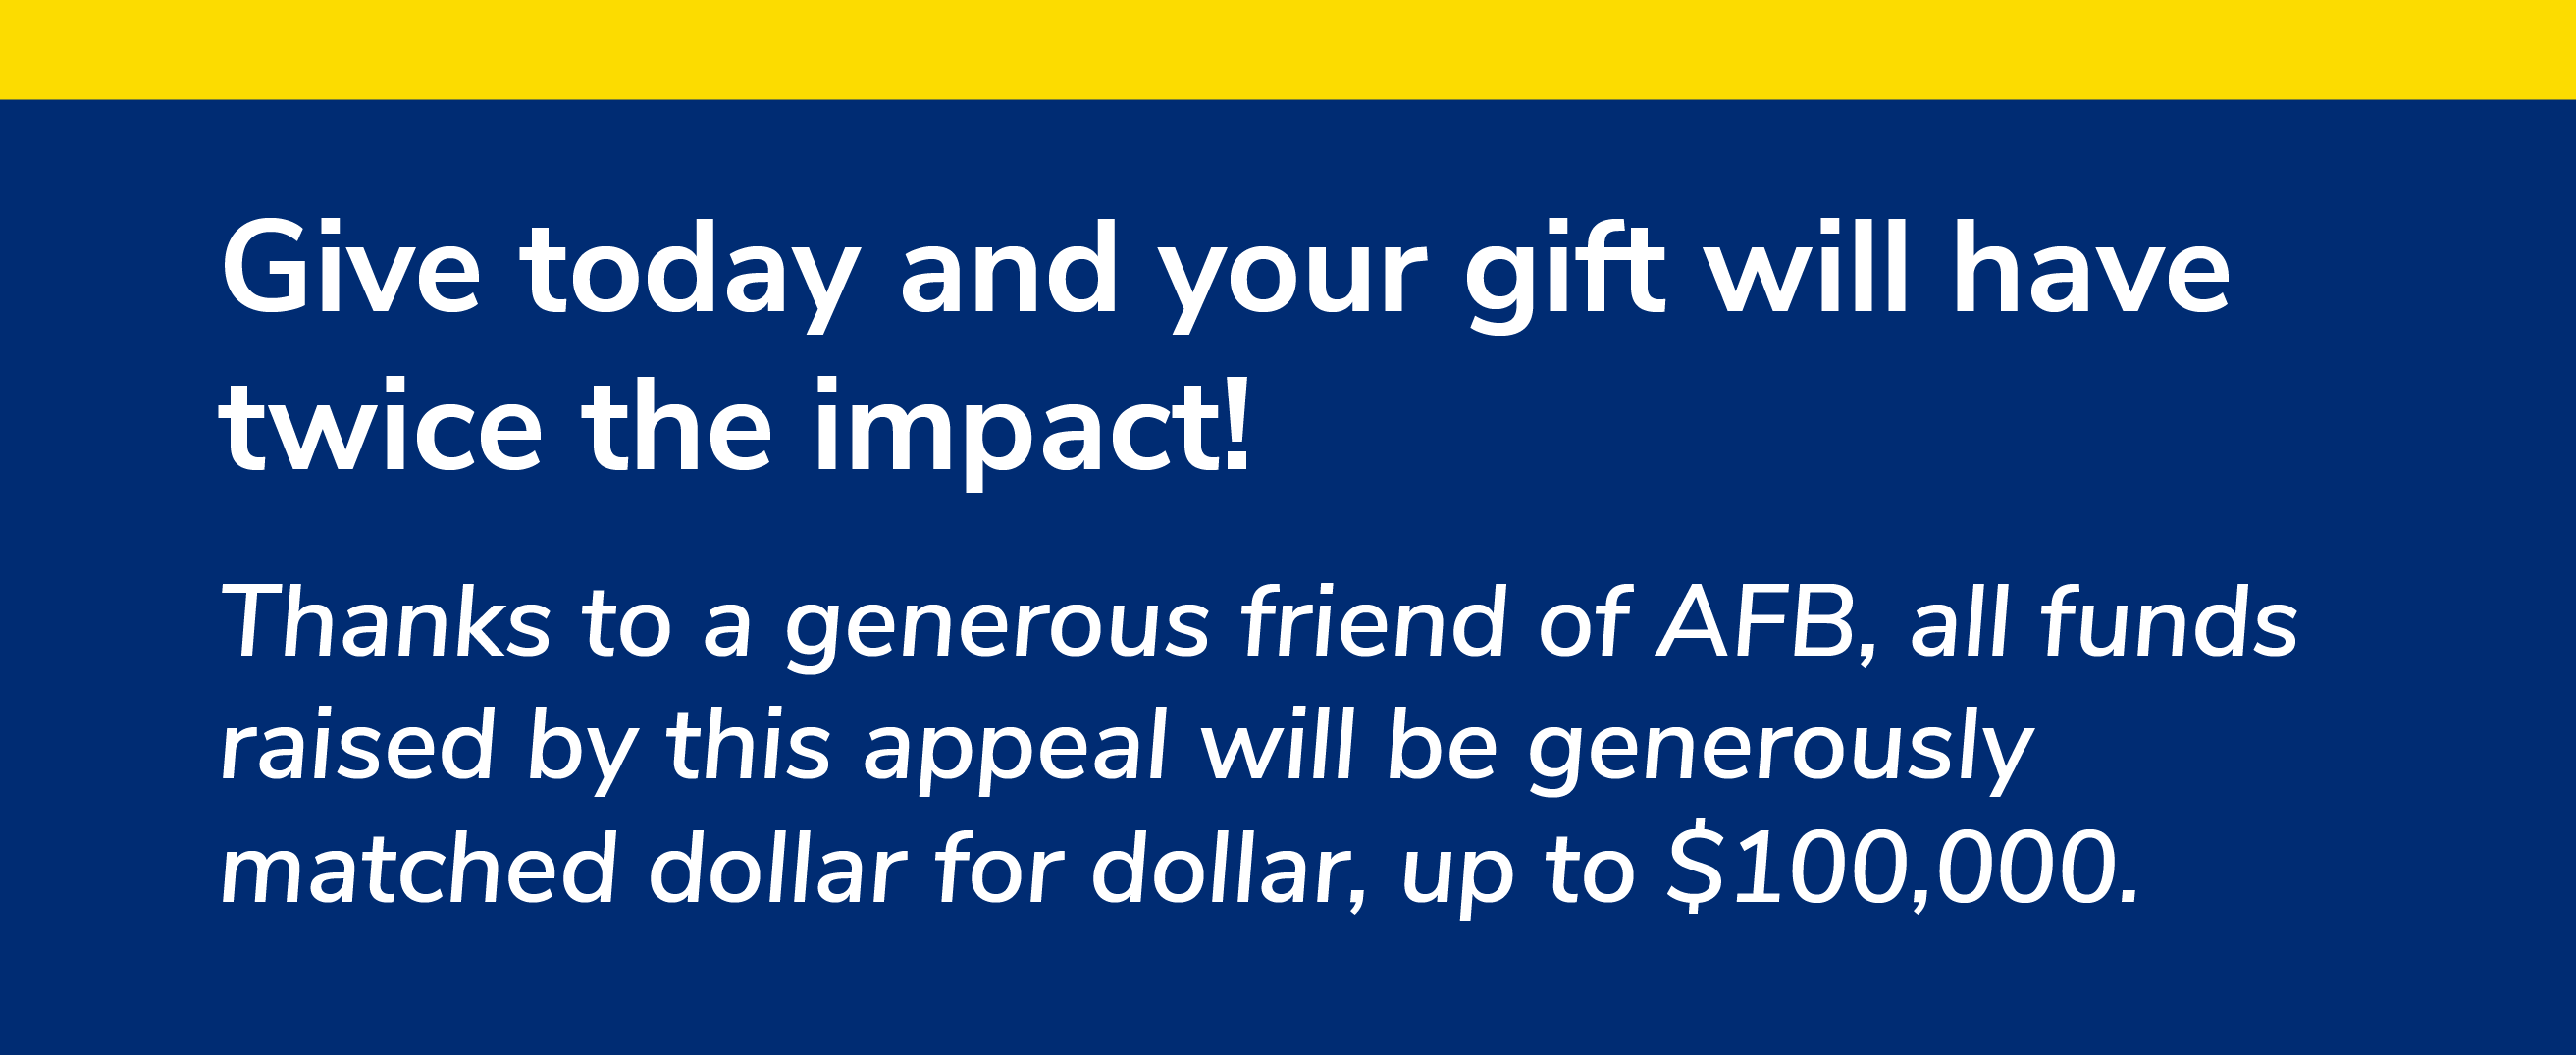 Give today and your gift will have twice the impact! Thanks to a generous friend of AFB, all funds raised by this appeal will be generously matched dollar for dollar, up to $100,000.